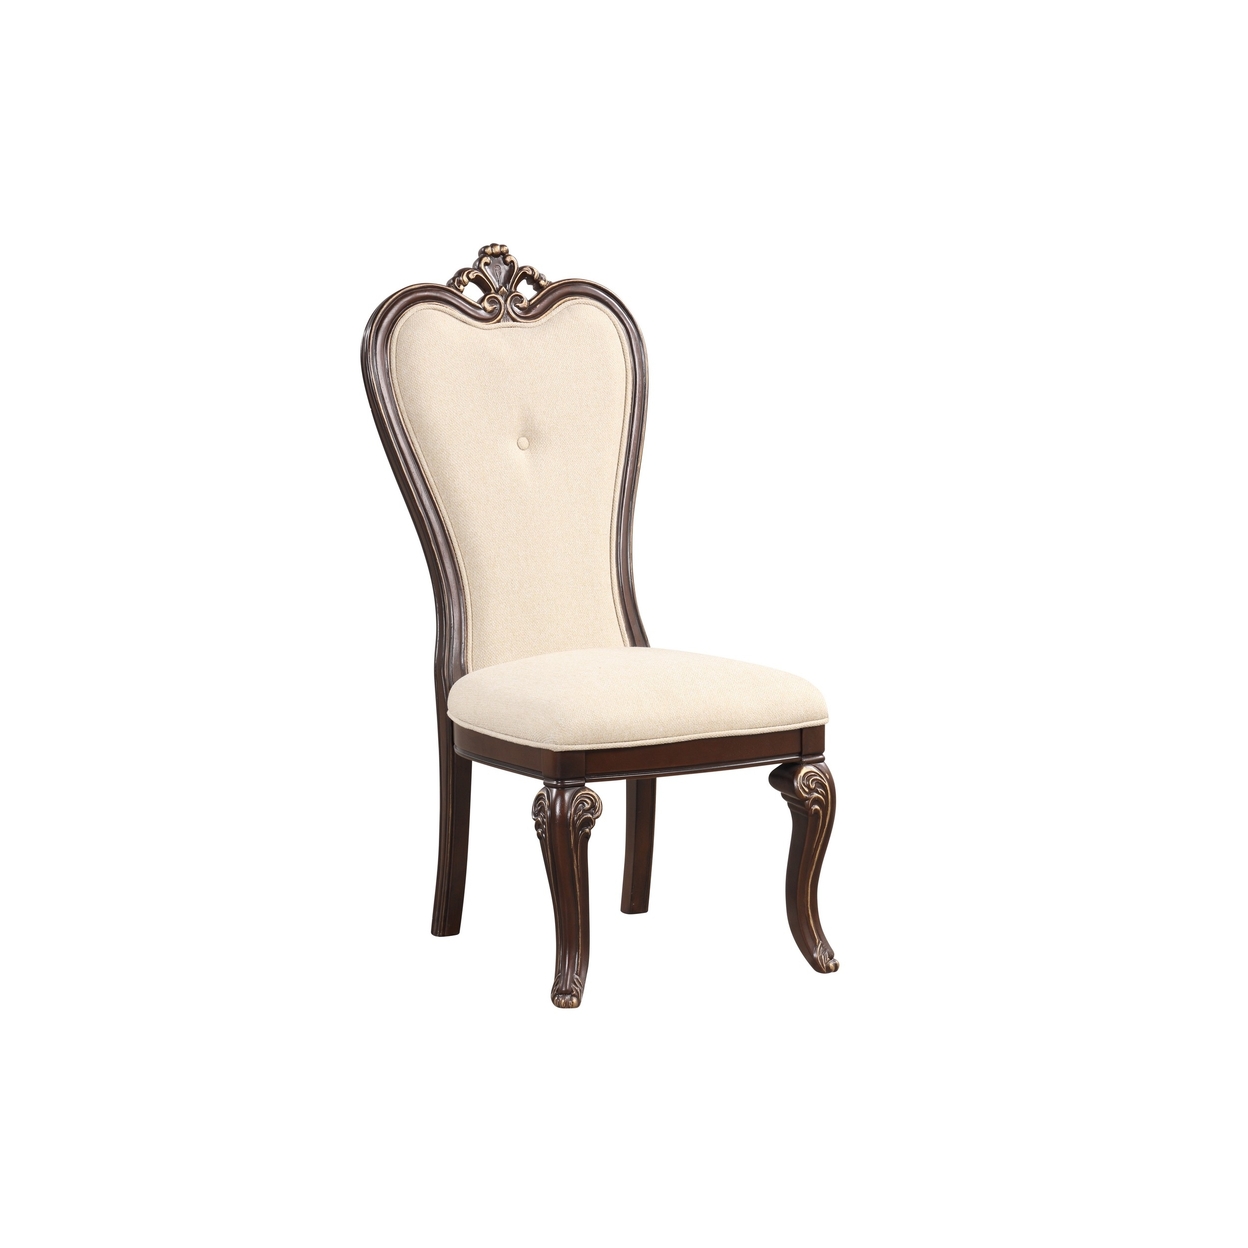 Mike 20 Inch Set Of 2 Dining Chairs, Crown Top, Beige Fabric Brown Wood - Saltoro Sherpi